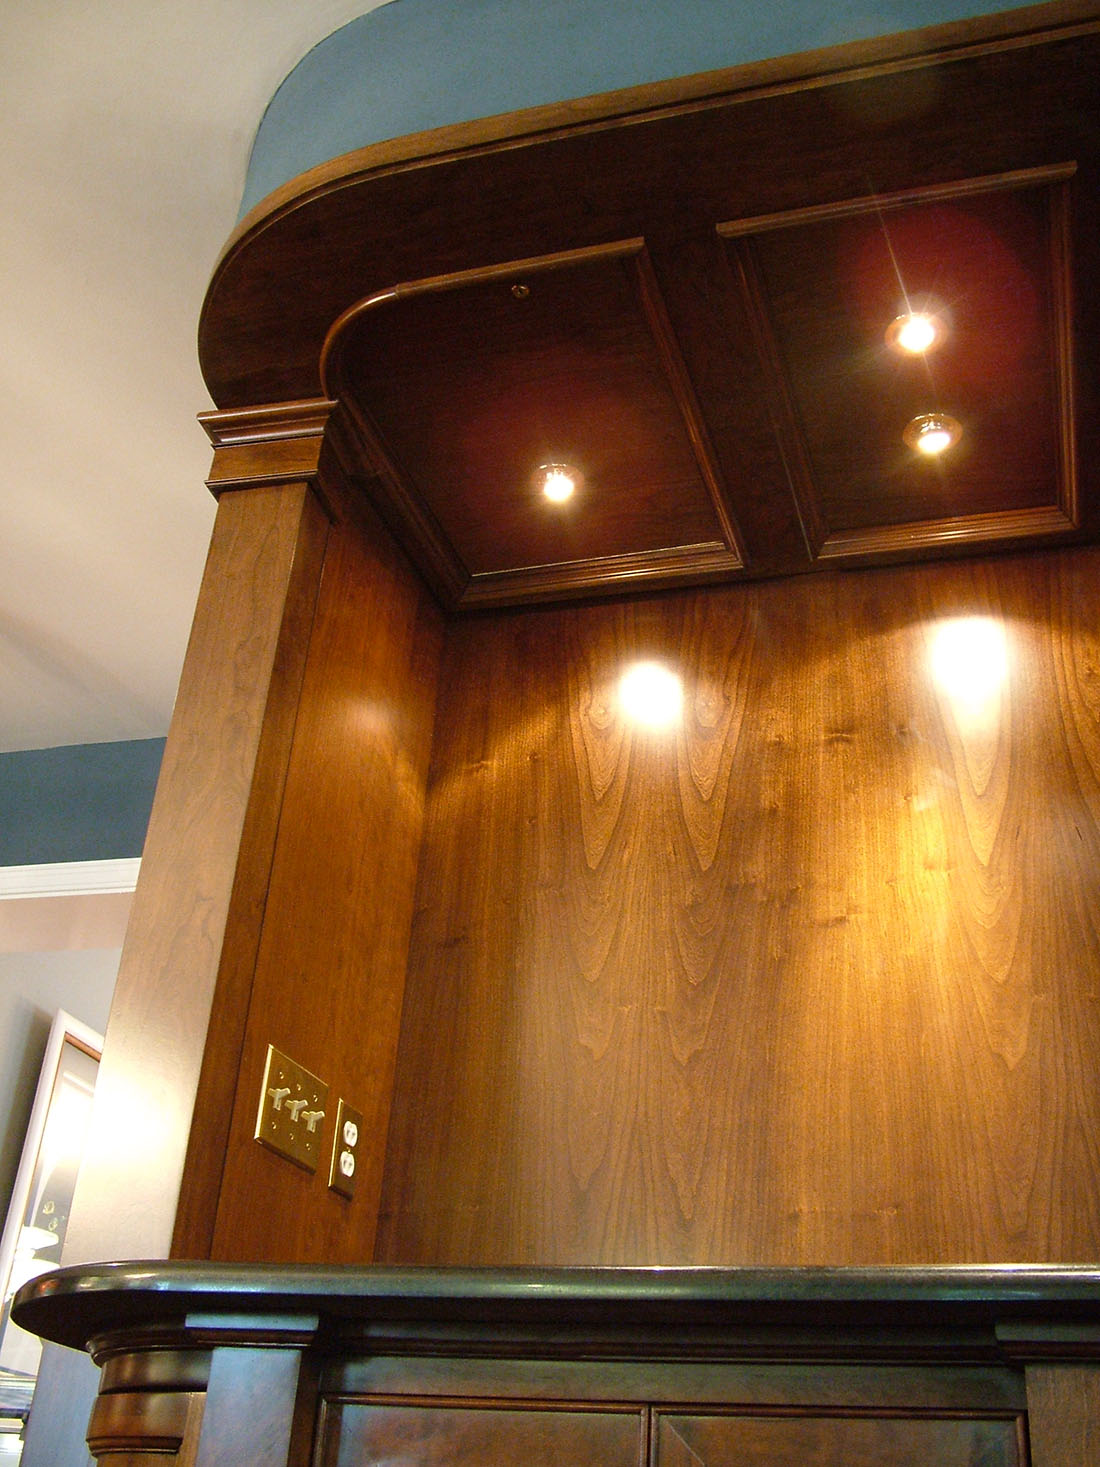 Ceiling panel of cabinetry with lighting and attic access panel